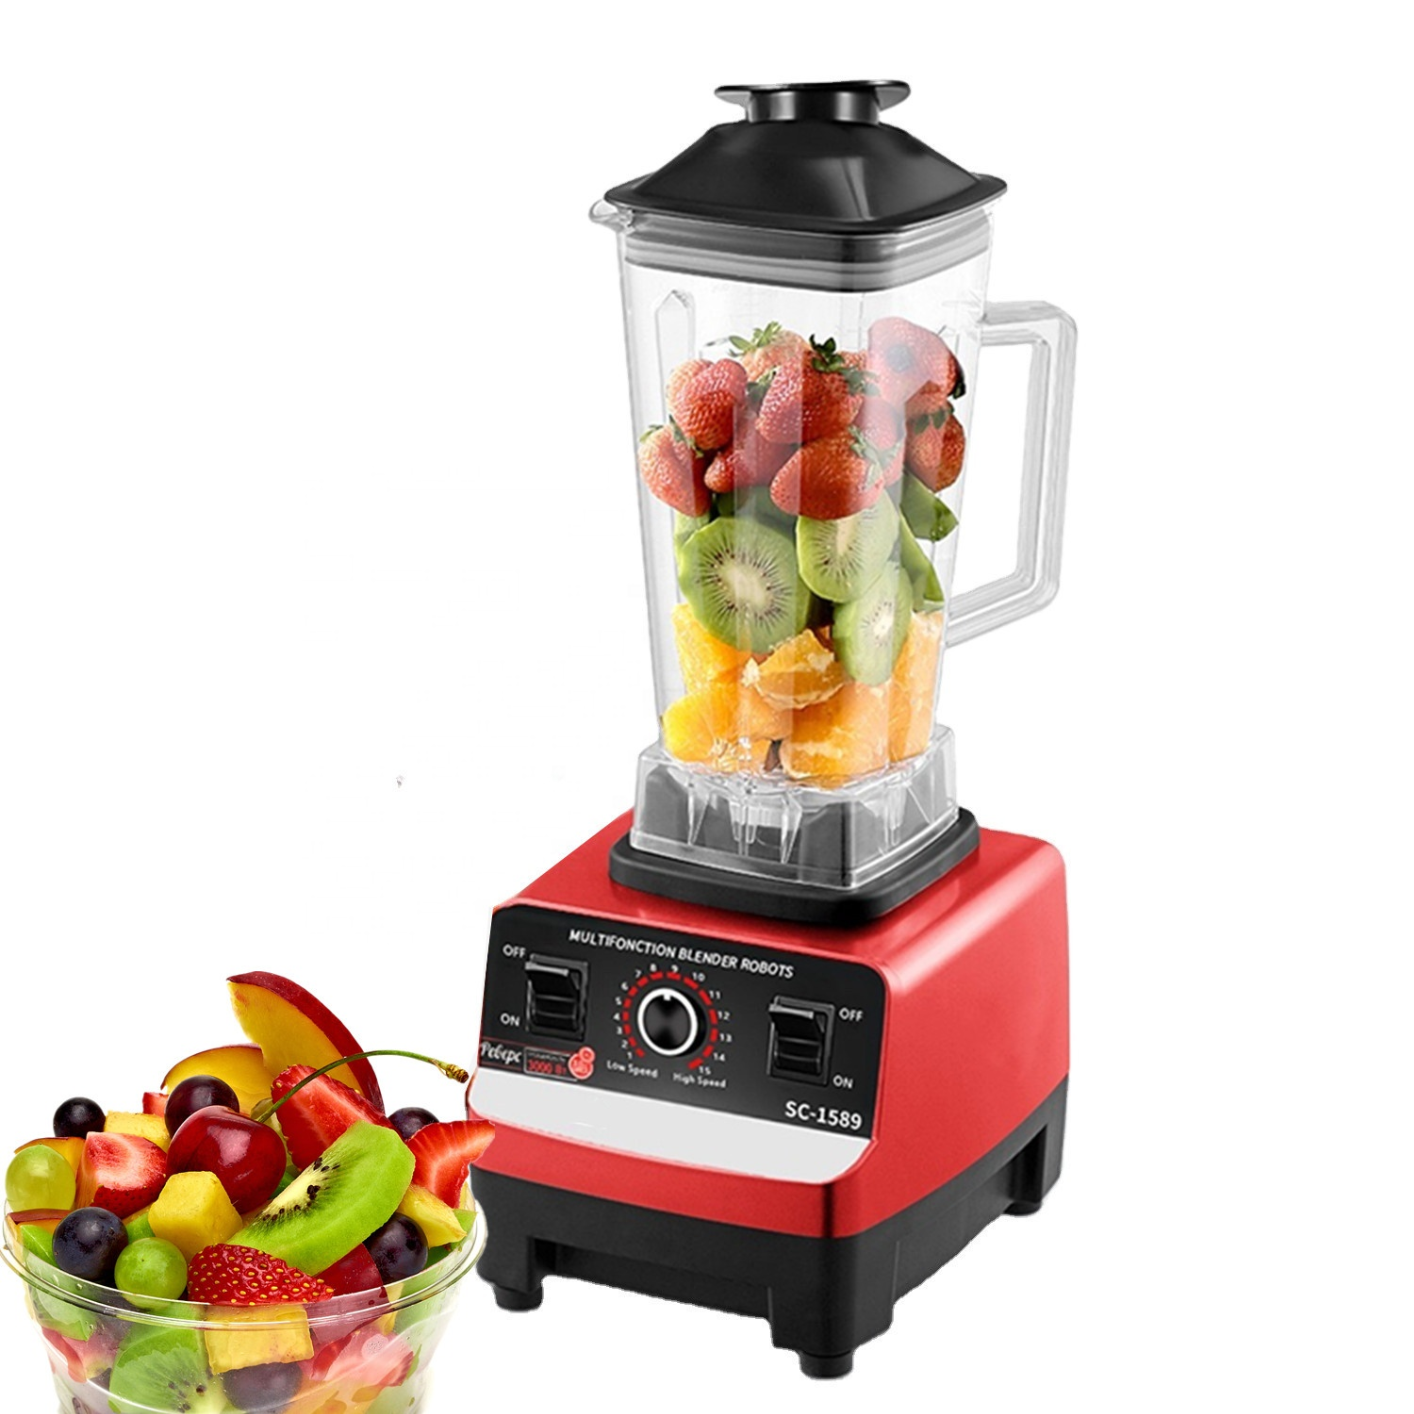 SC-1589 2L 4500W Blender Ice Smoothies Fruit Food Processor Powerful Heavy Juicer 3HP Mixer Professional Commercial Grade Blenders